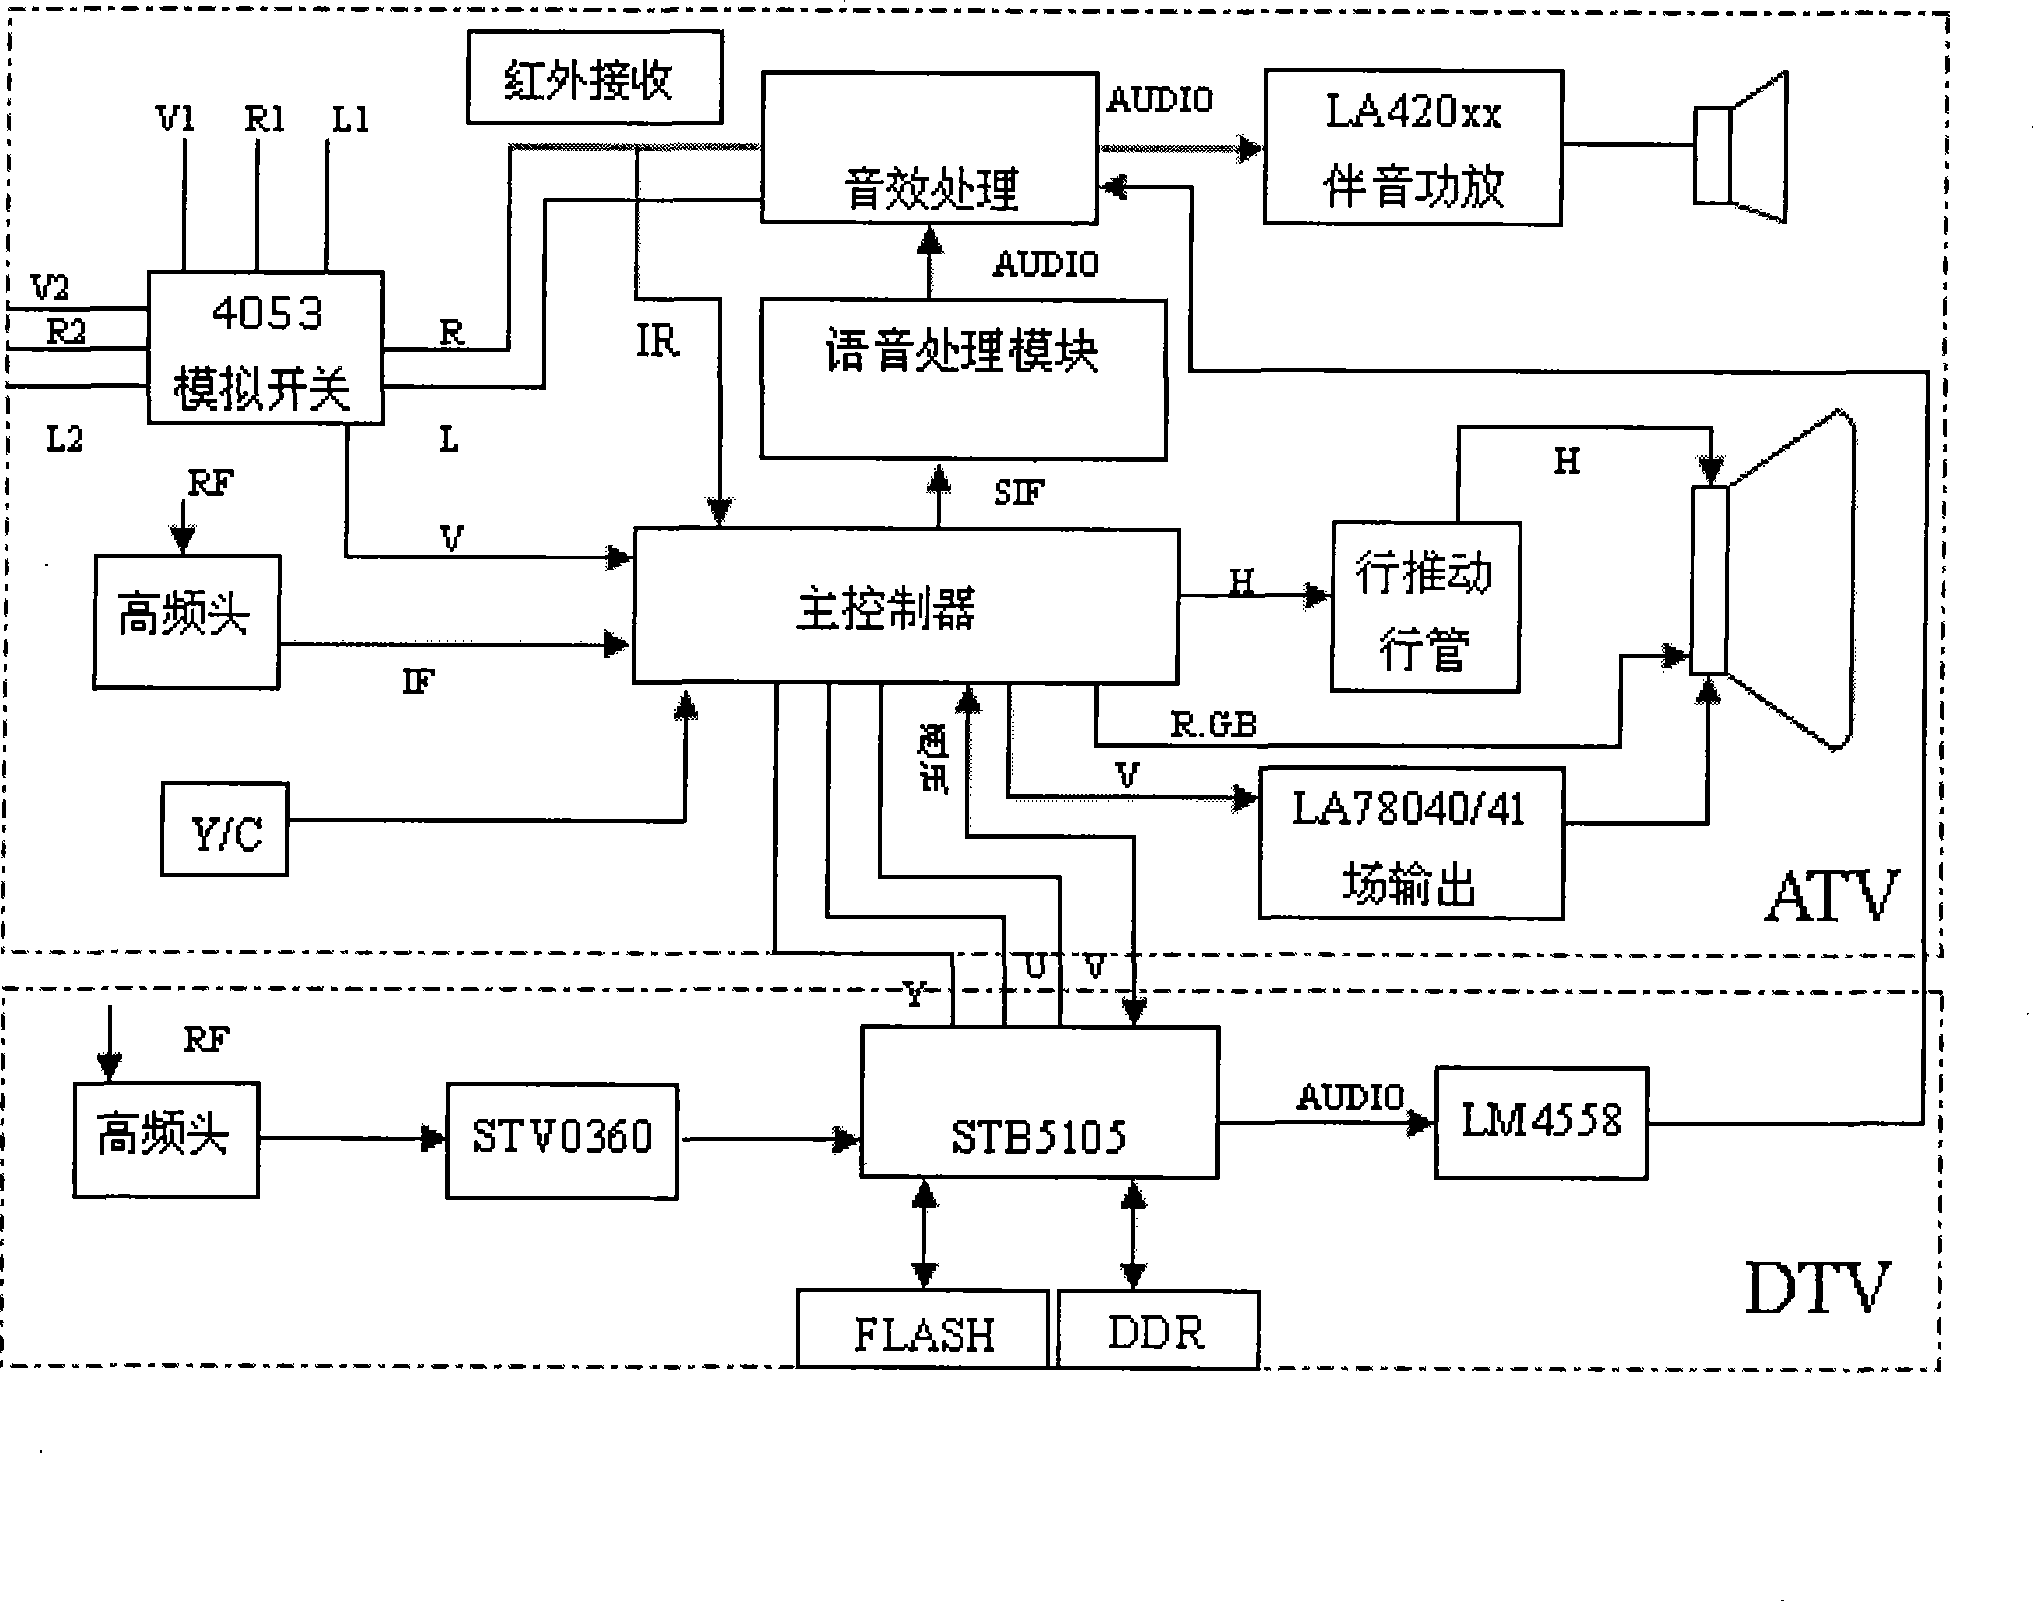 Digital analog integrated color television receiving system